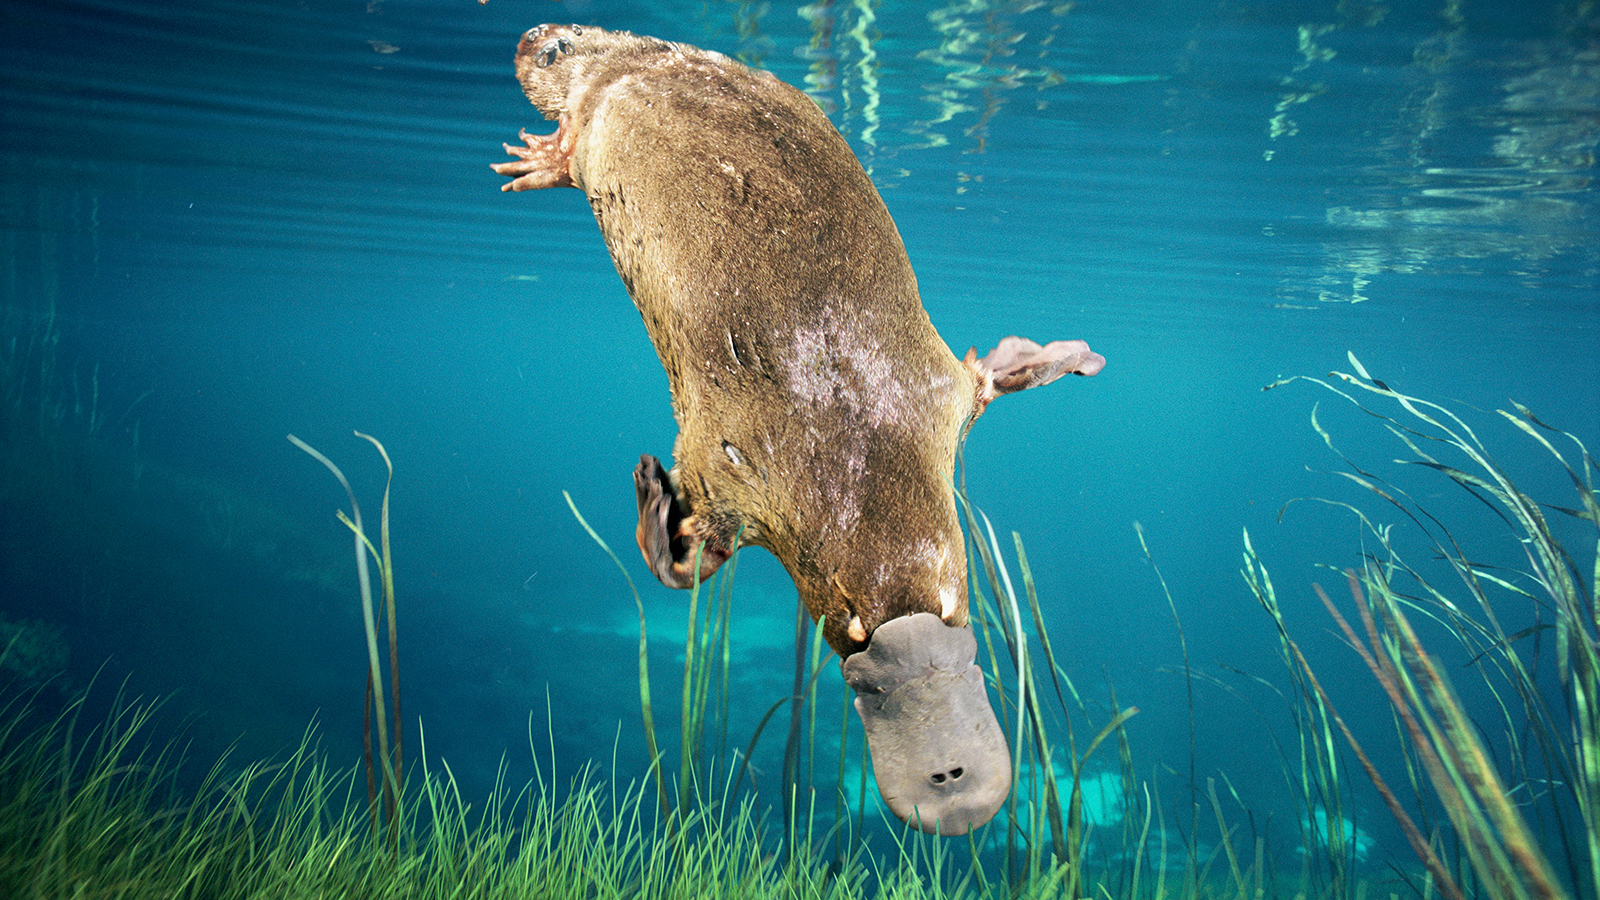 If You Think You Can Pass This Tough General Knowledge Quiz, You’re Wrong Duck billed Platypus diving (Ornithorhynchus anatinus), Tasmania, Australia. Digital composite